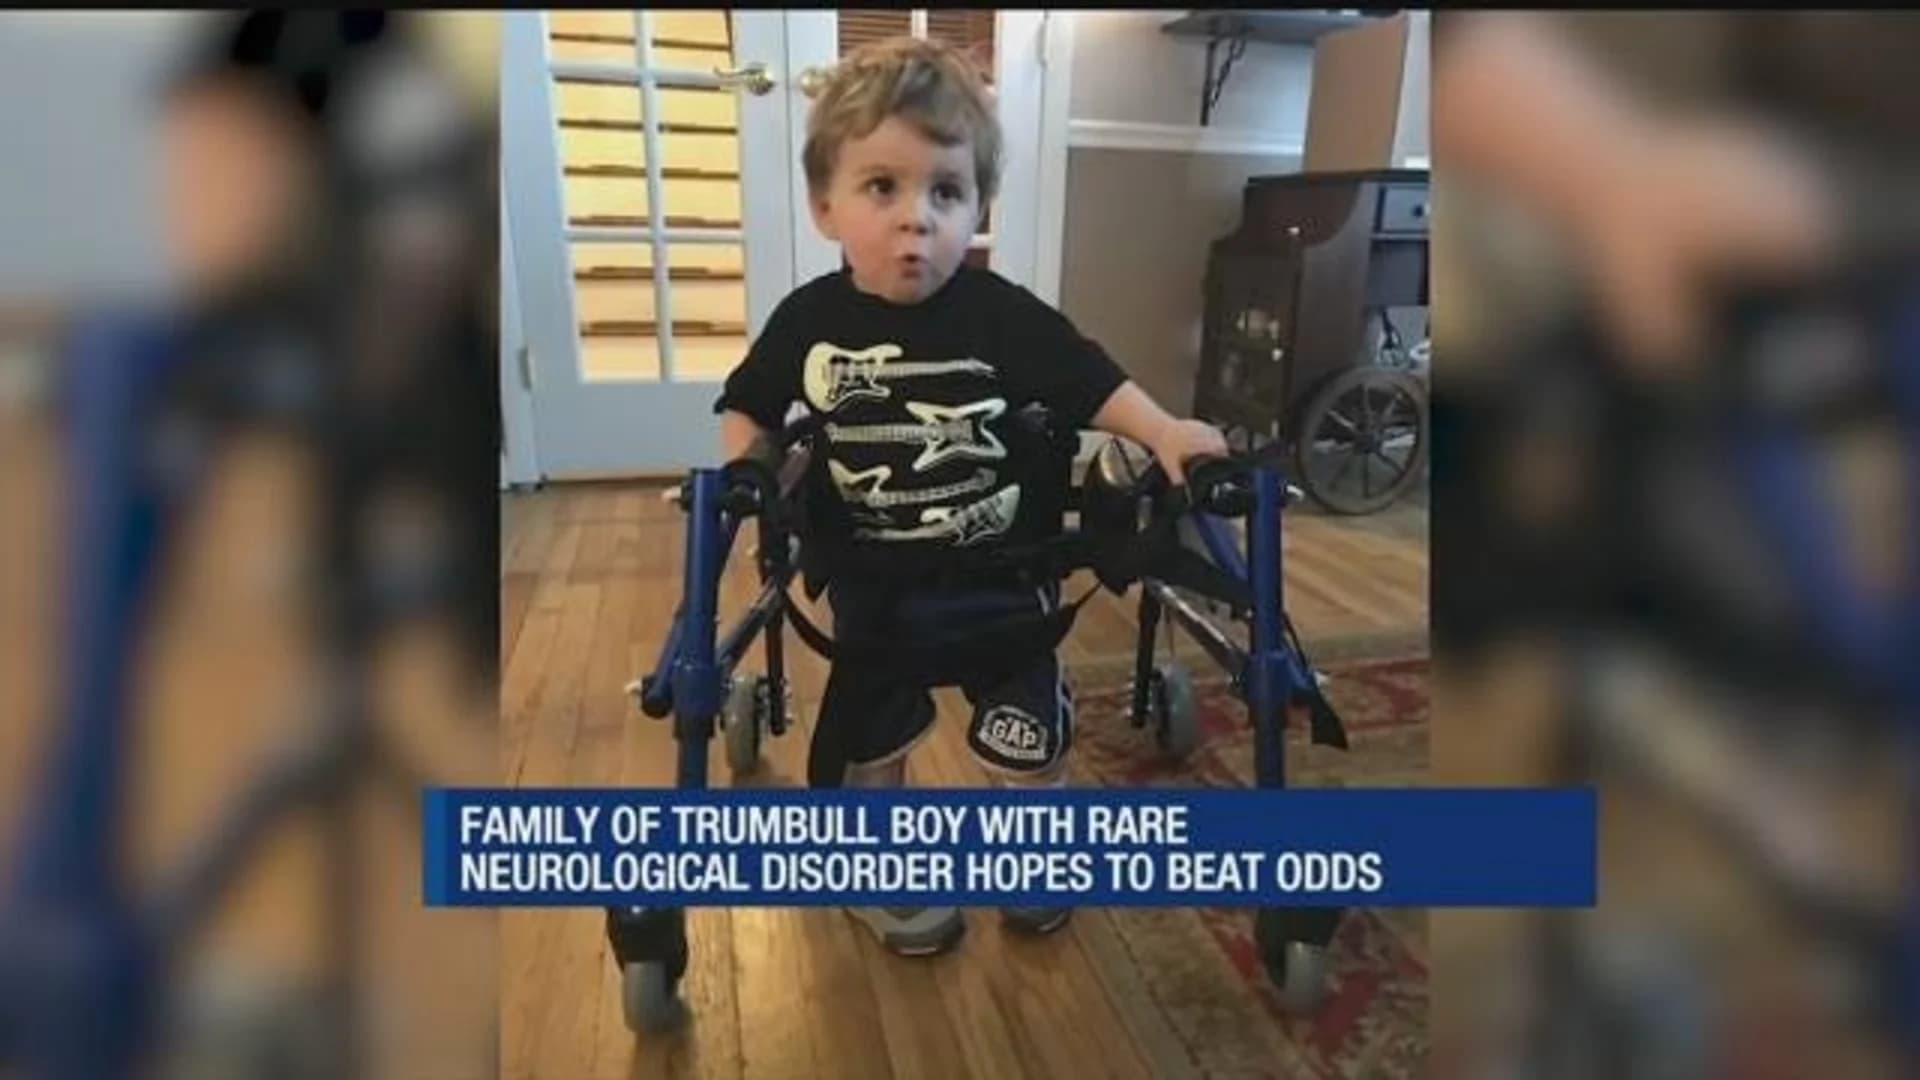 Family raising funds for 3-year-old facing rare neurological disorder